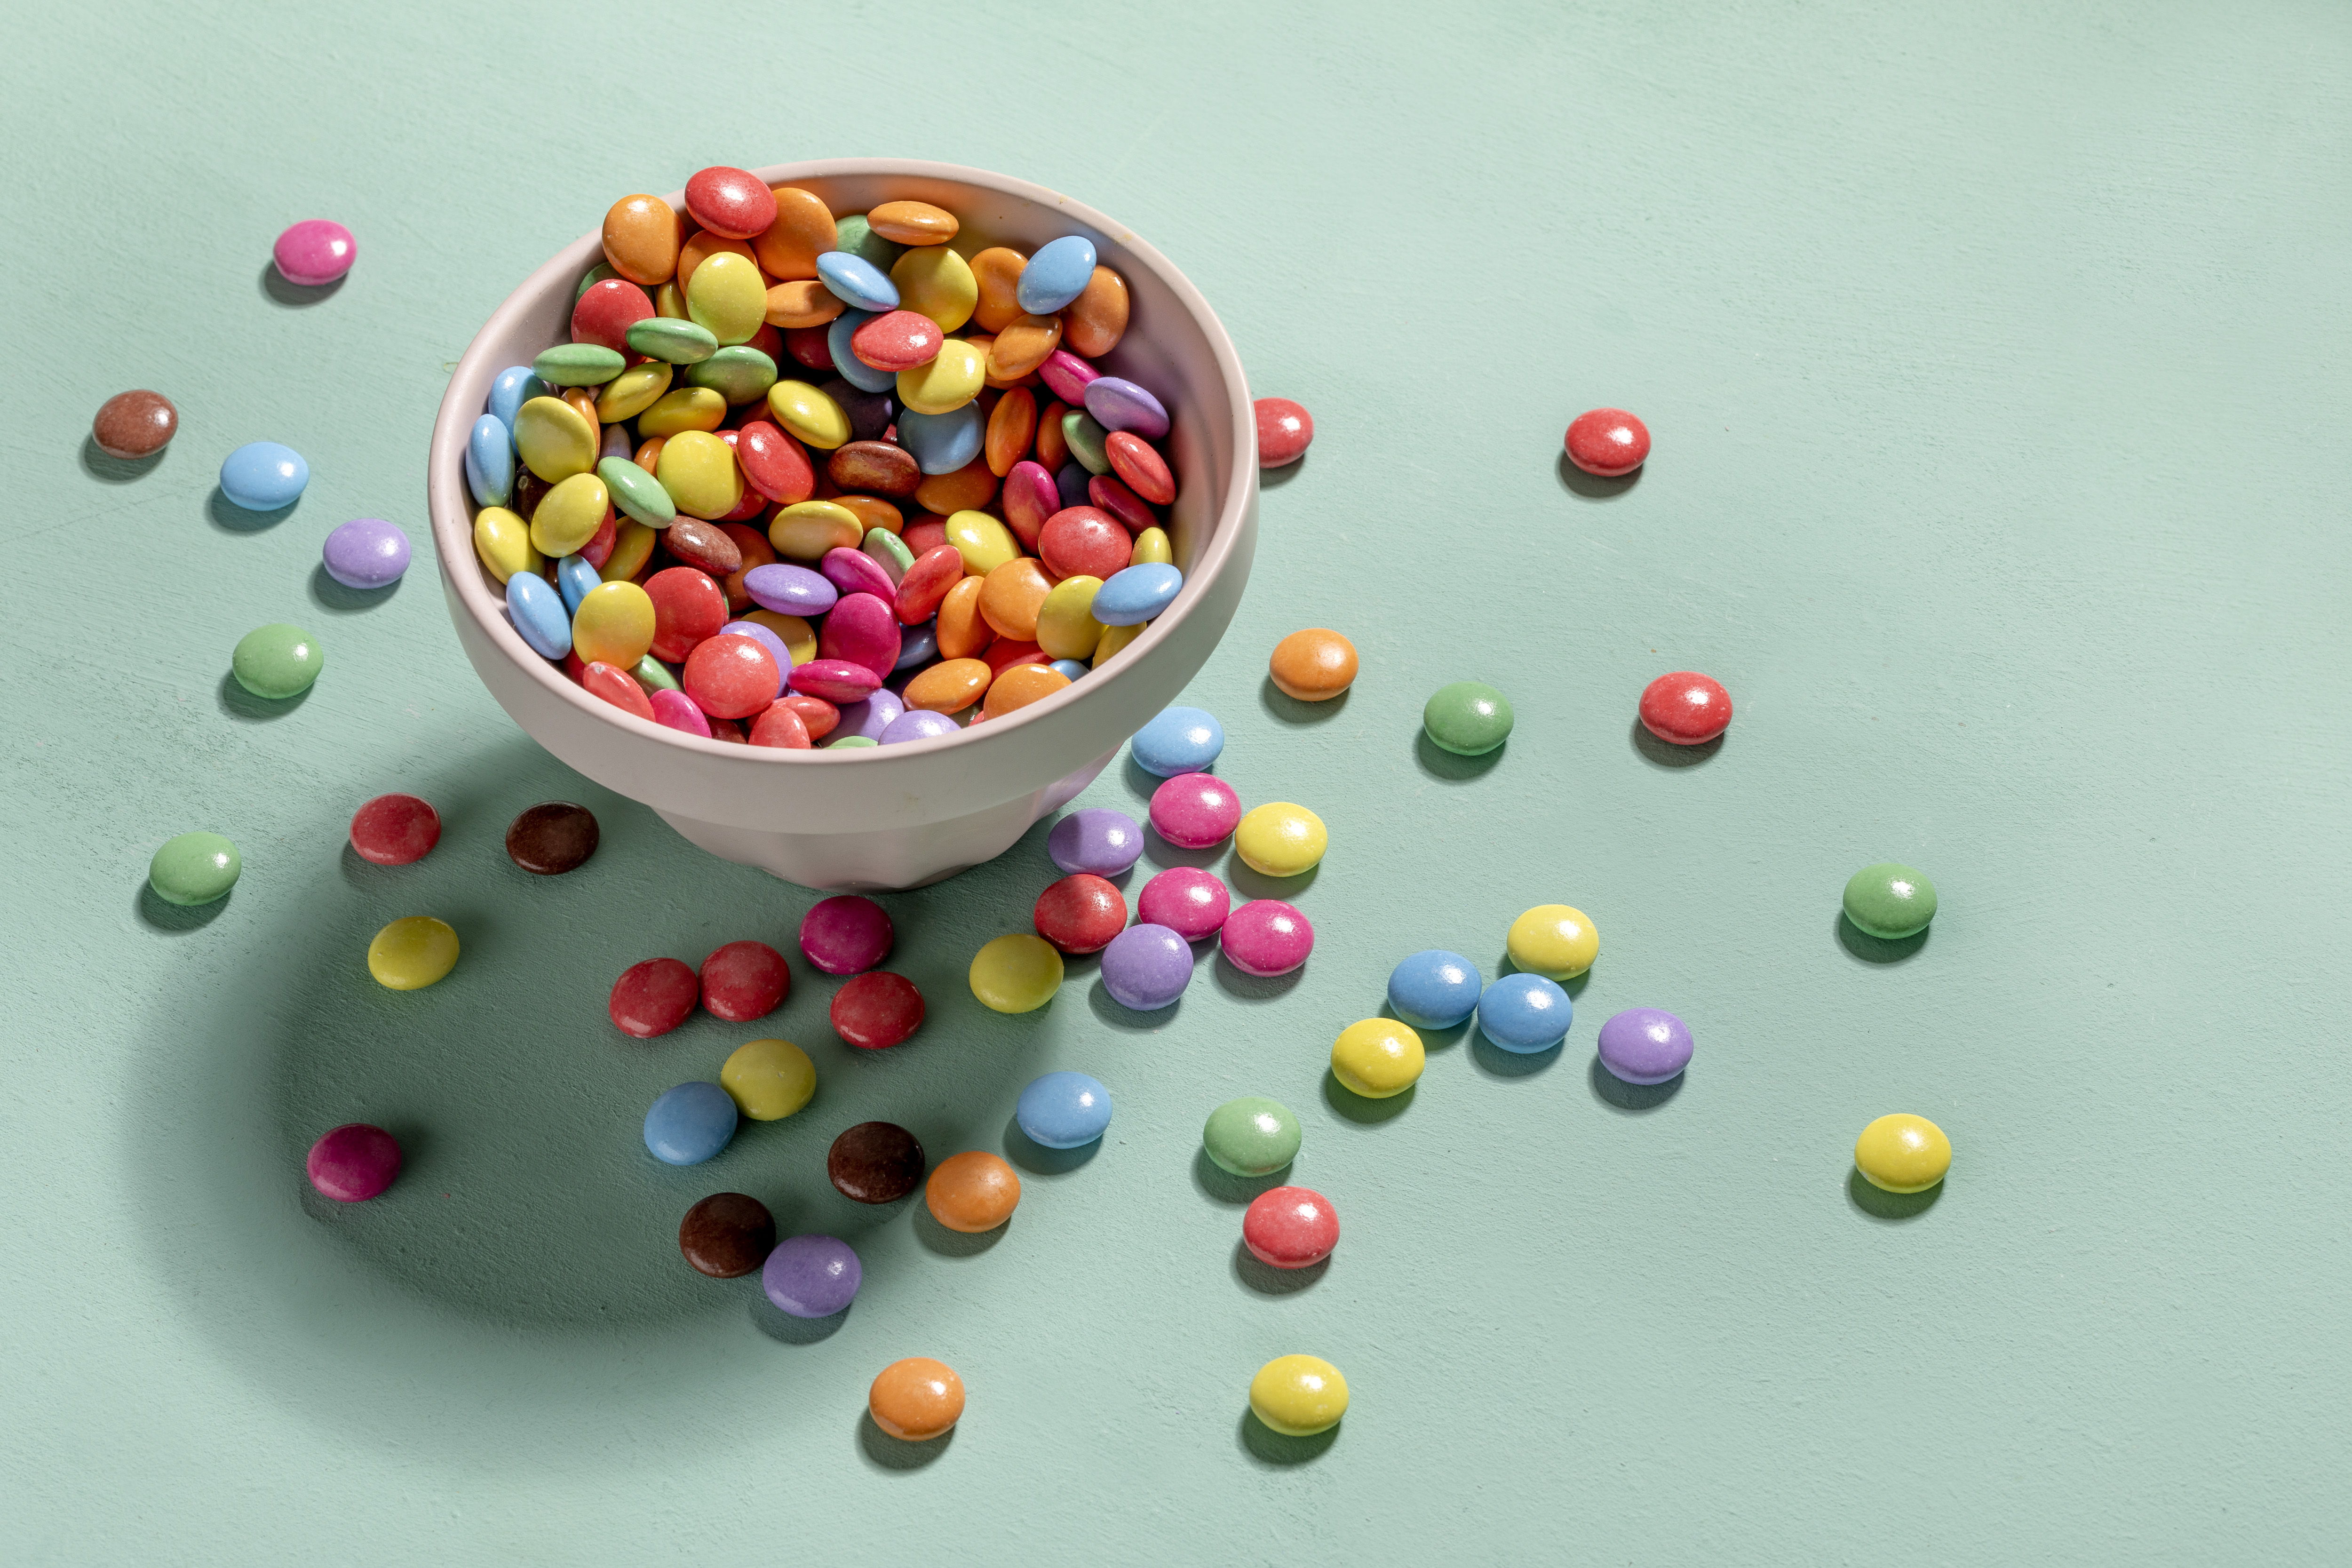 EXBERRY® colors can deliver bright colors in applications including confectionery (Image credit: GNT)